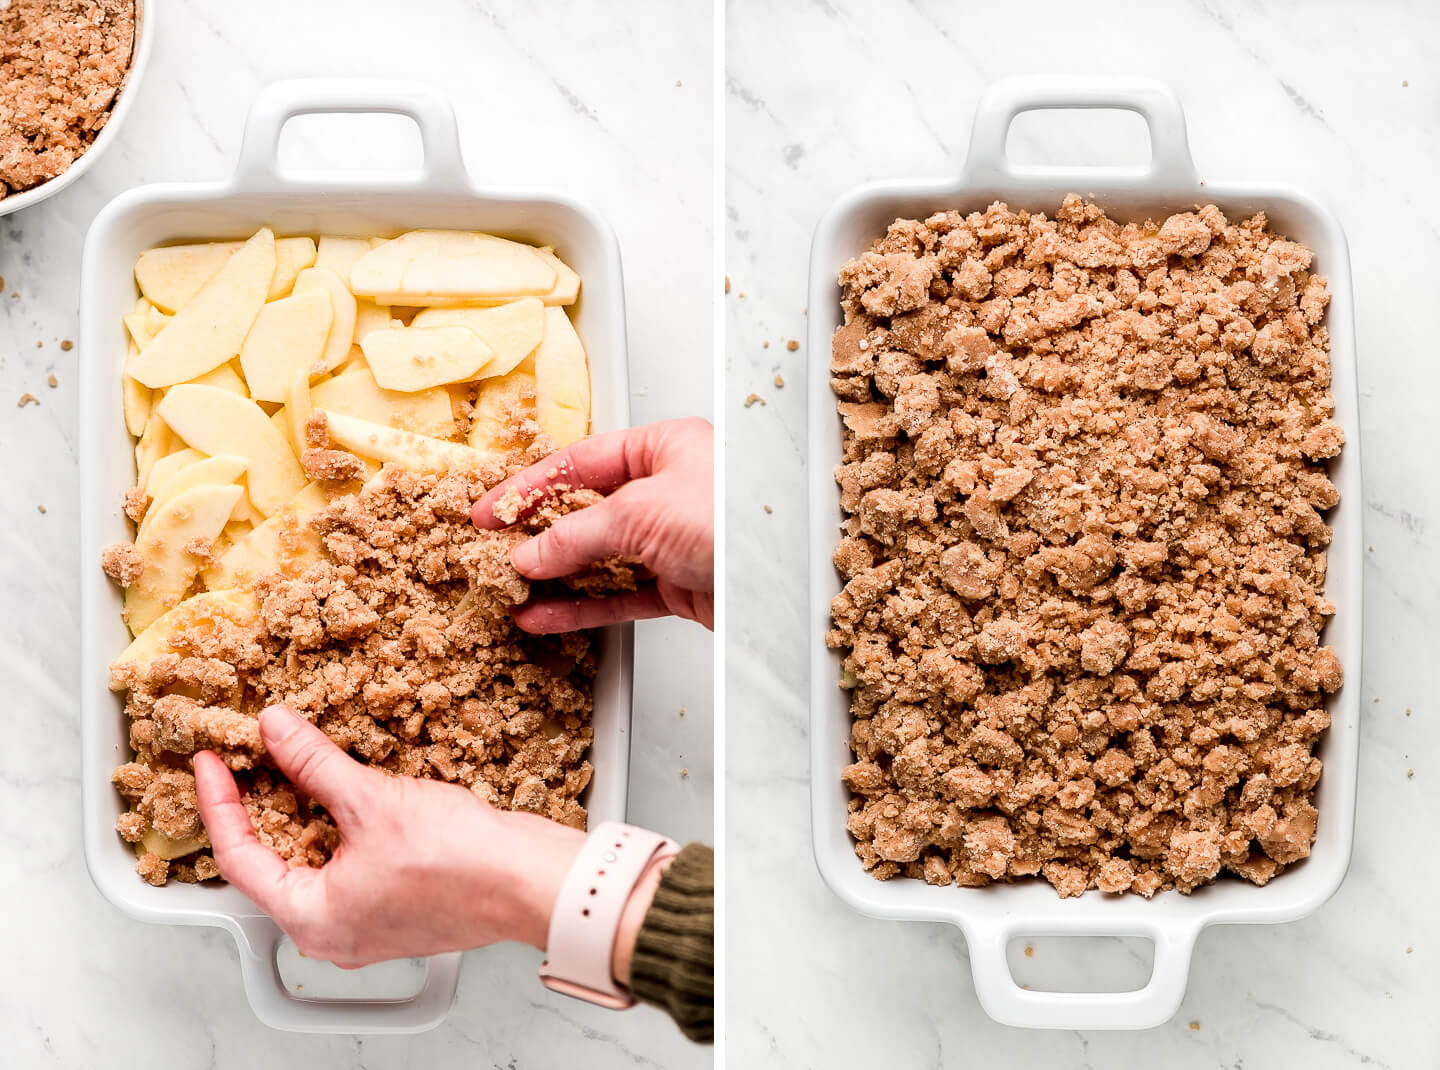 Diptych- Hands sprinkling a crumble over sliced apples in a baking dish; apples completely covered by the crumble.